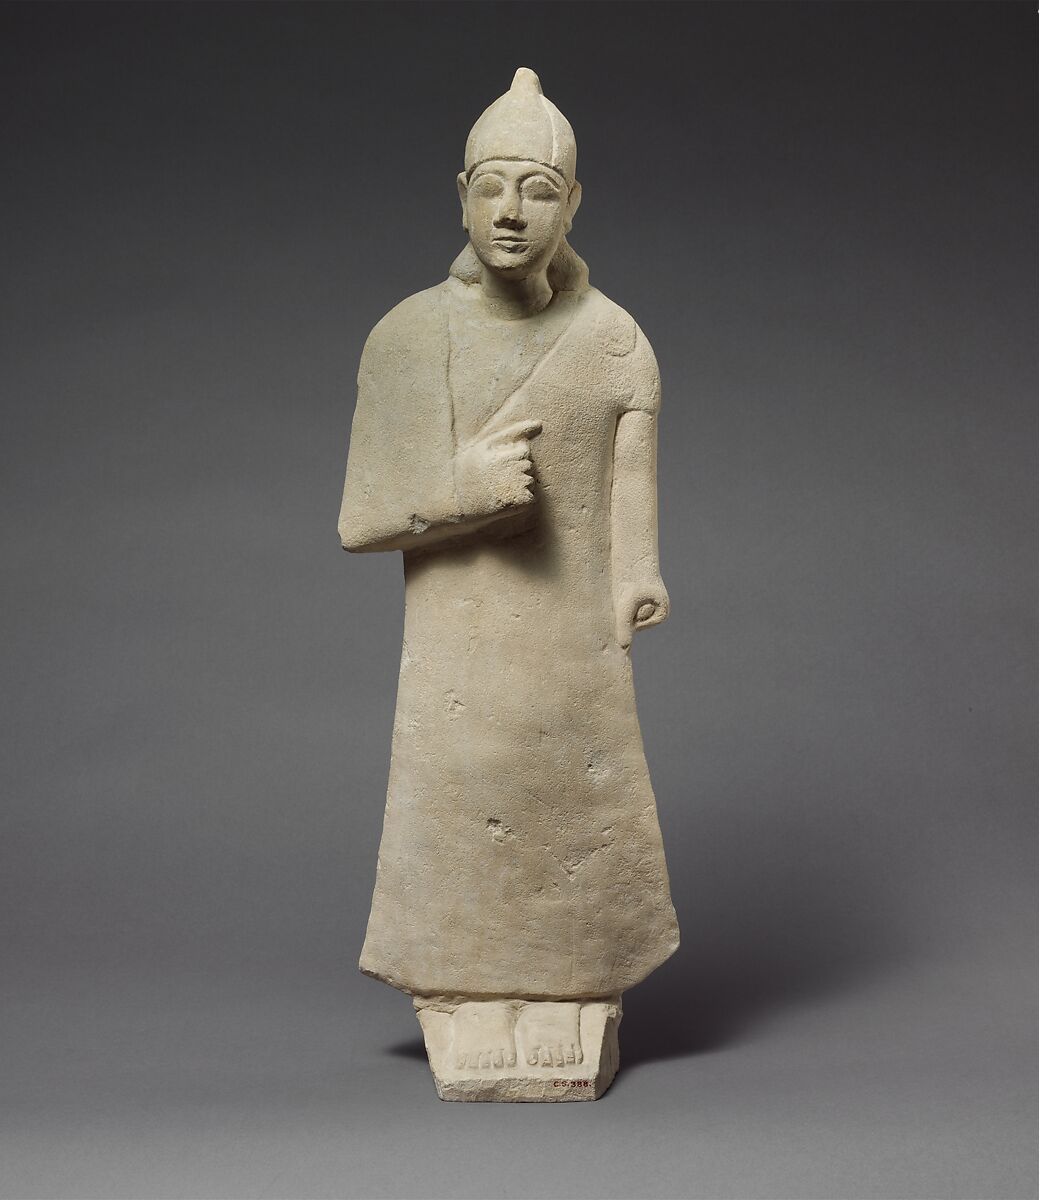 Statuette of a beardless male votary wearing a long garment and a conical helmet, Limestone, Cypriot 